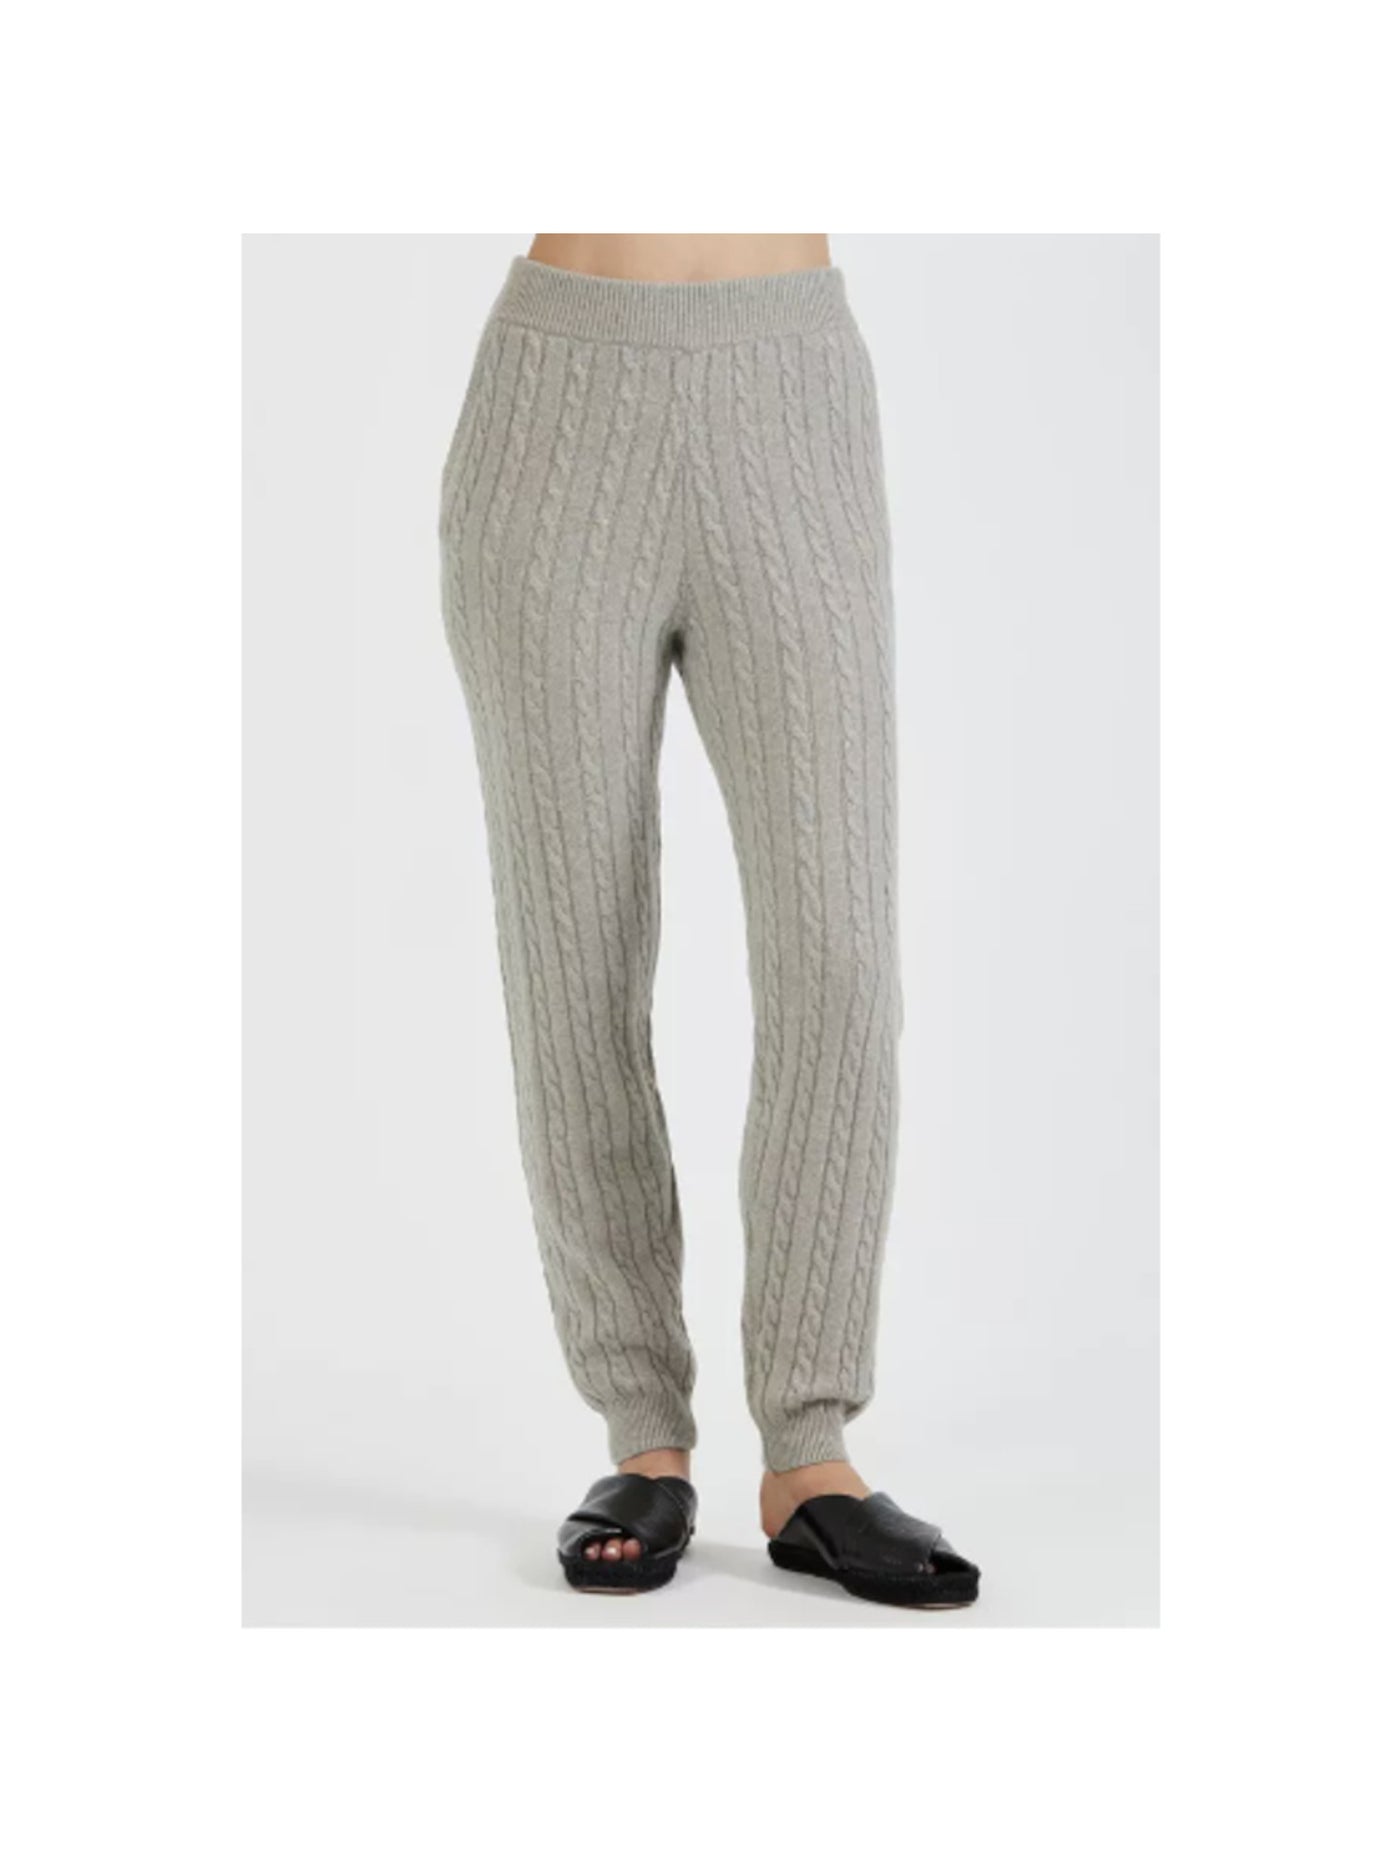 ATM Womens Gray Heather Lounge Pants S